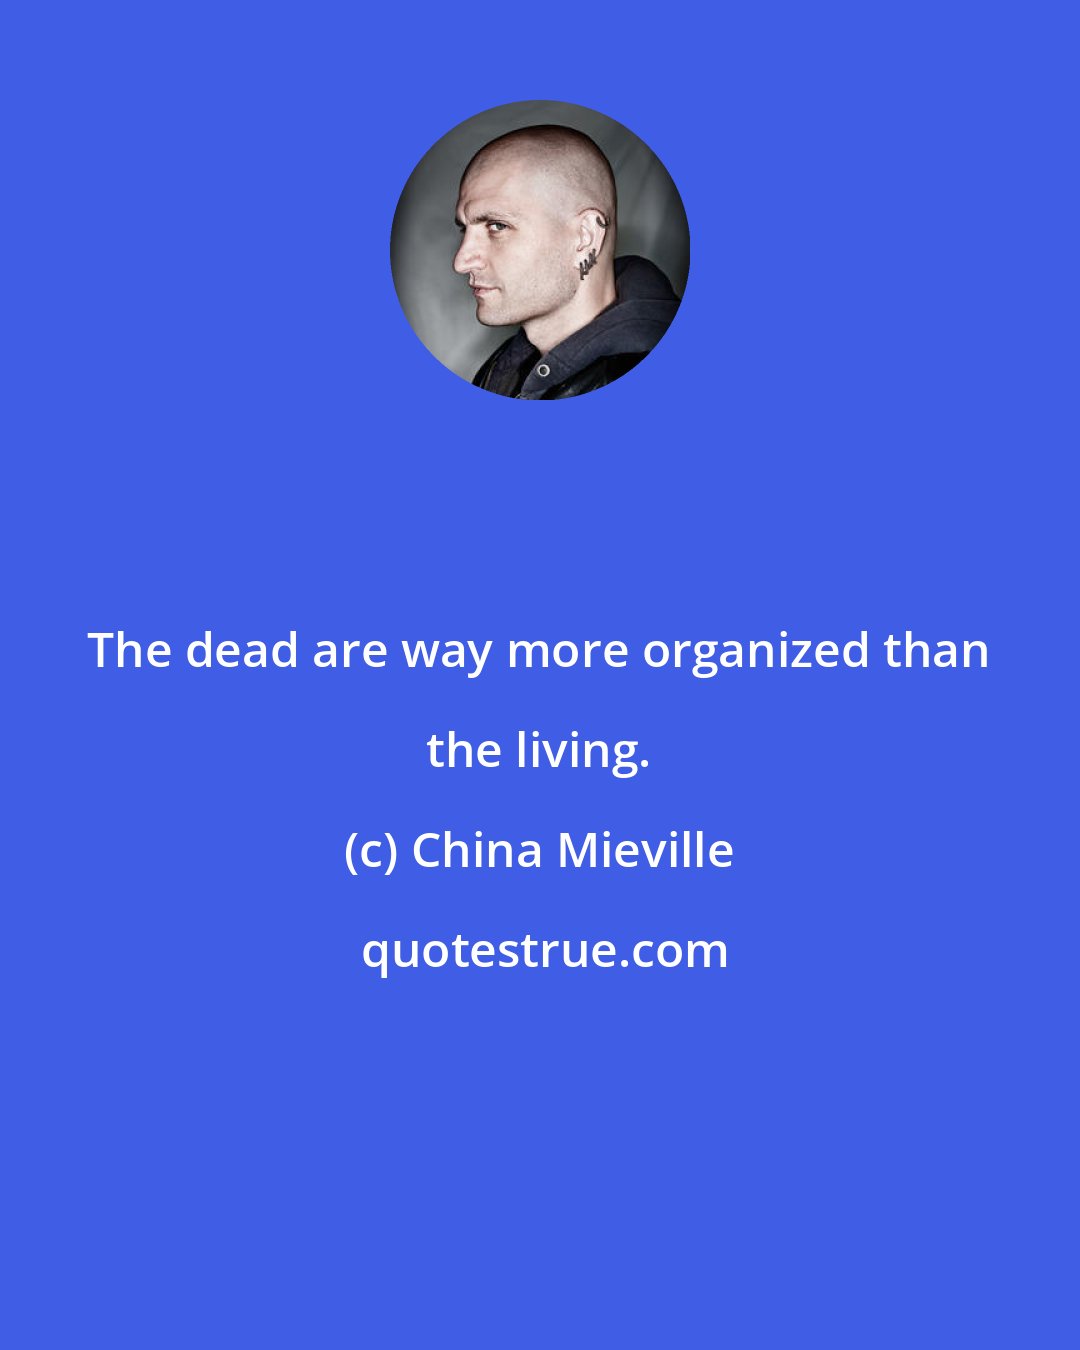 China Mieville: The dead are way more organized than the living.